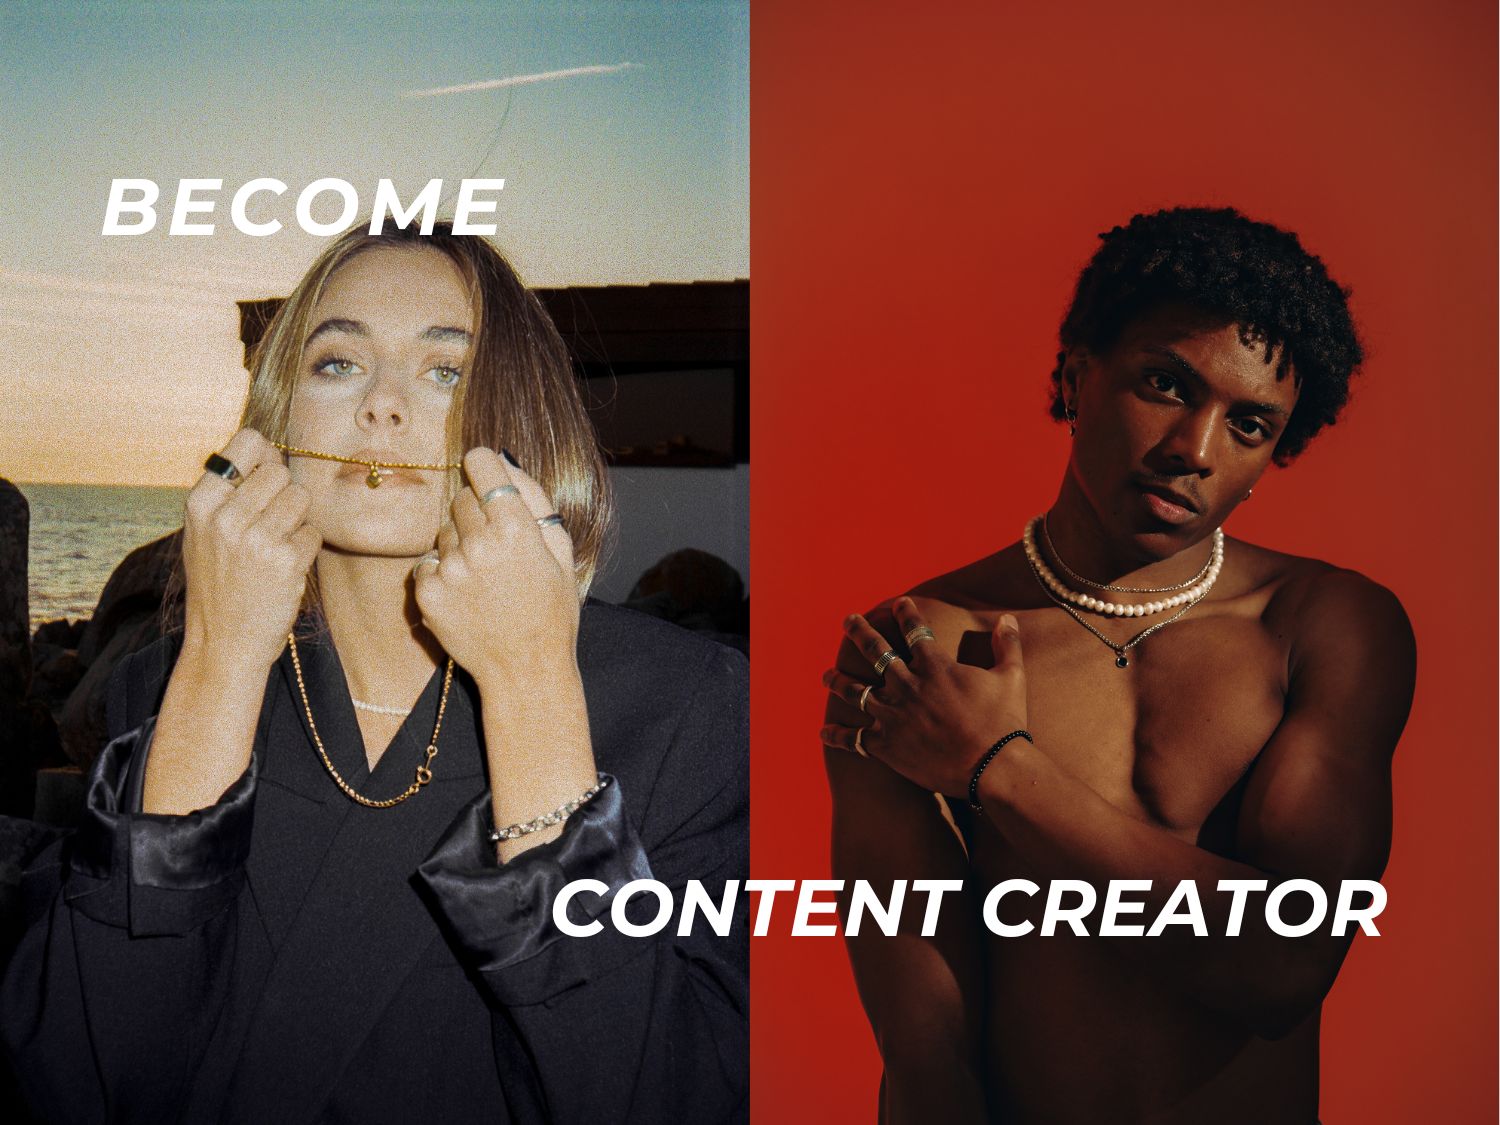 HOW TO BECOME A CONTENT CREATOR OR AFFILIATE?